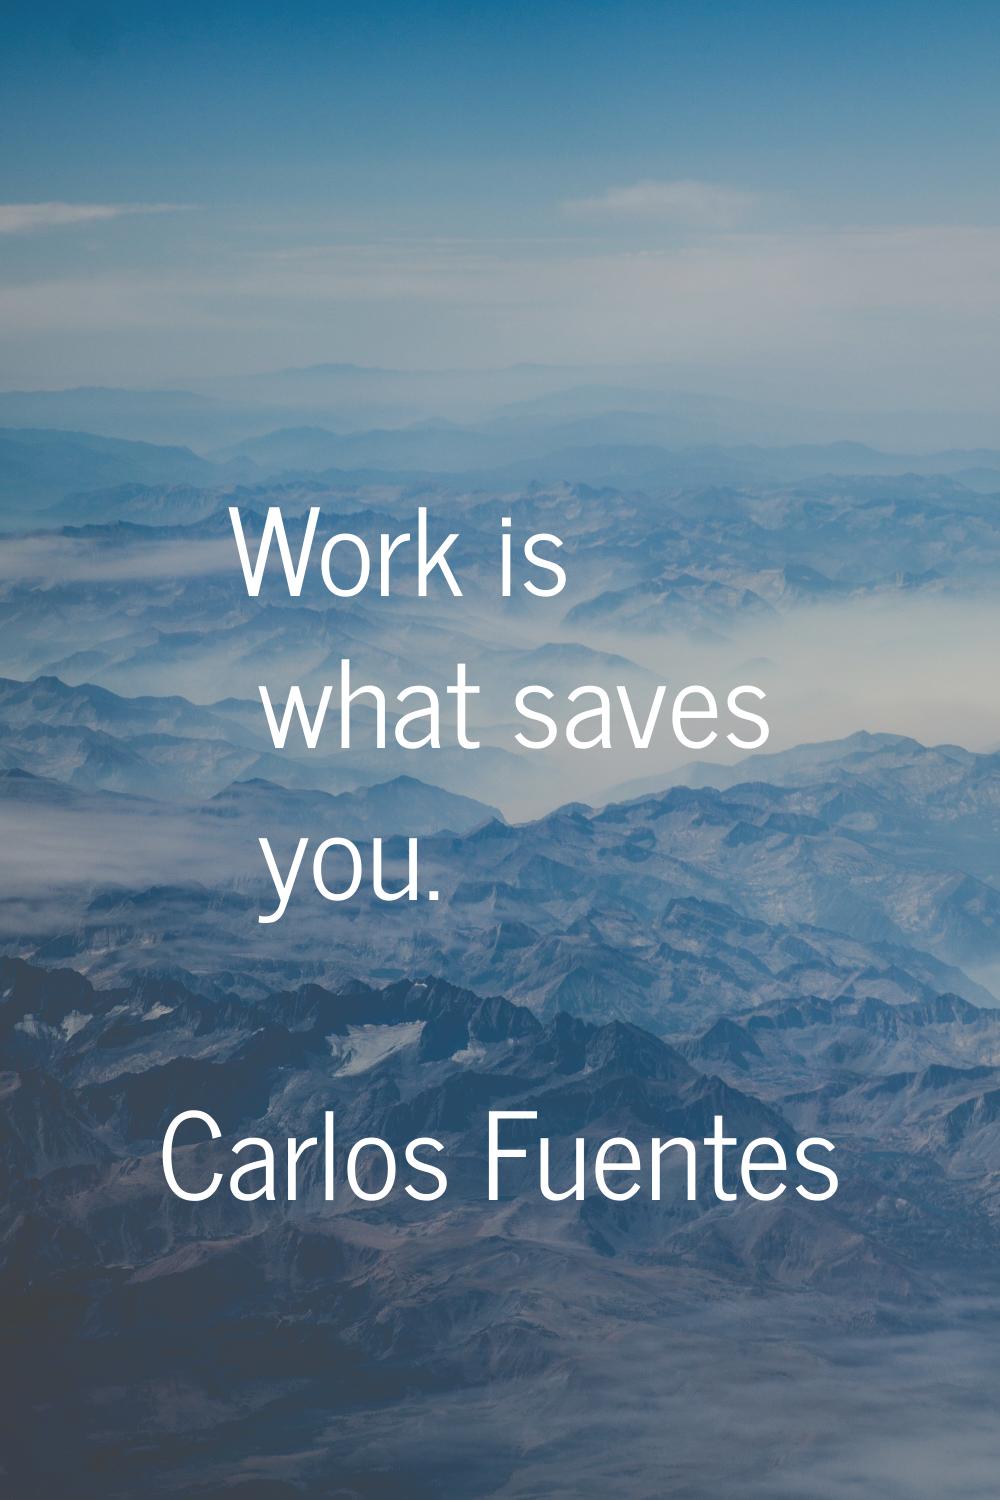 Work is what saves you.